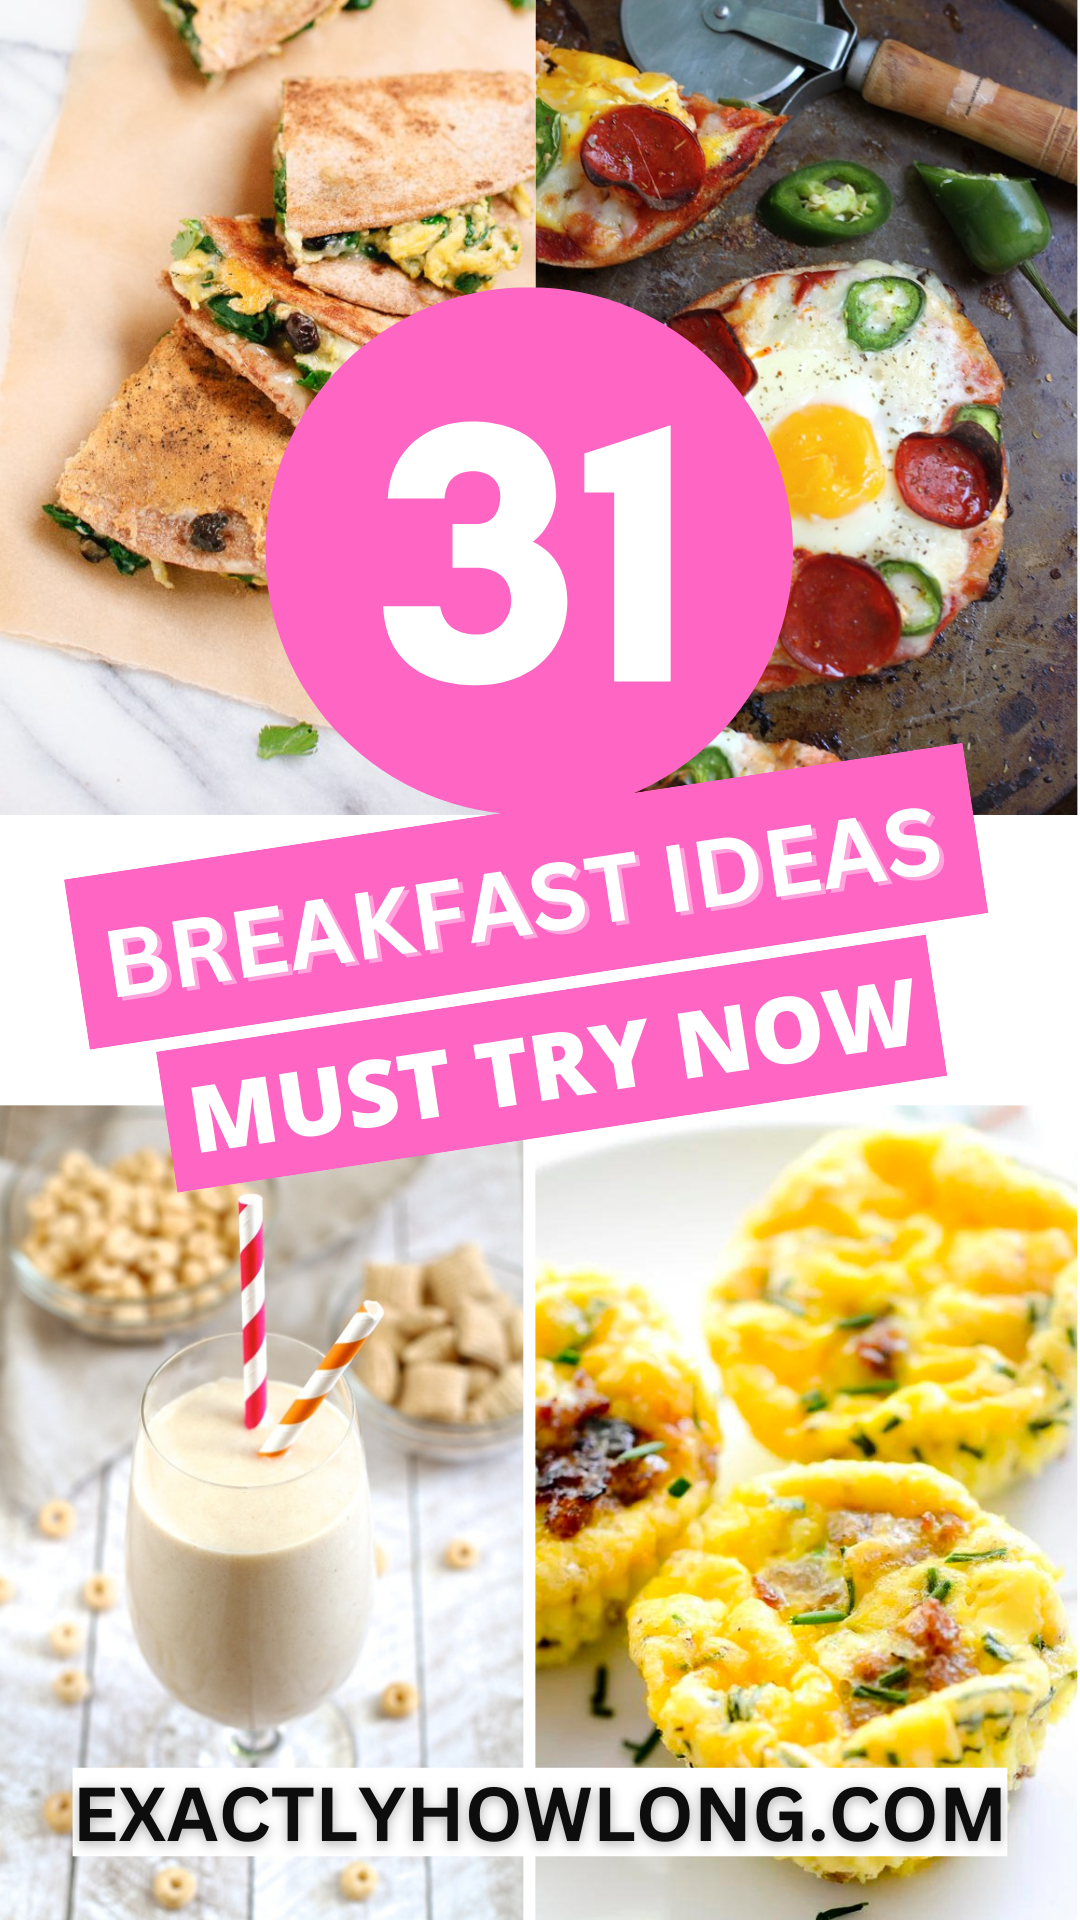 Crowd-pleasing breakfast ideas: savory, quick, easy, and fun for a group